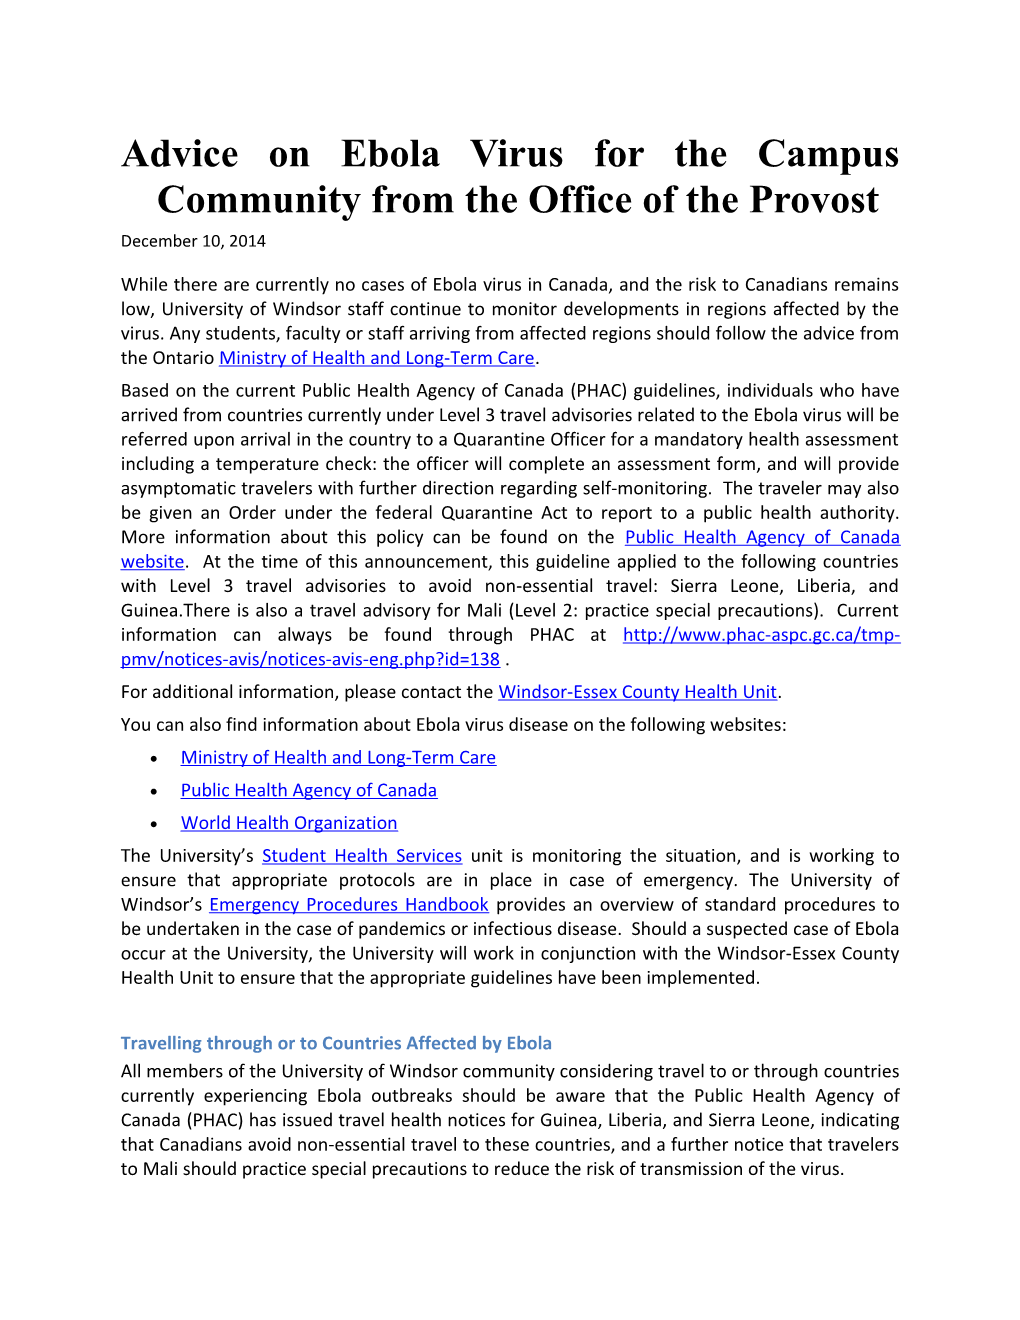 Advice on Ebola Virus for the Campus Community from the Office of the Provost